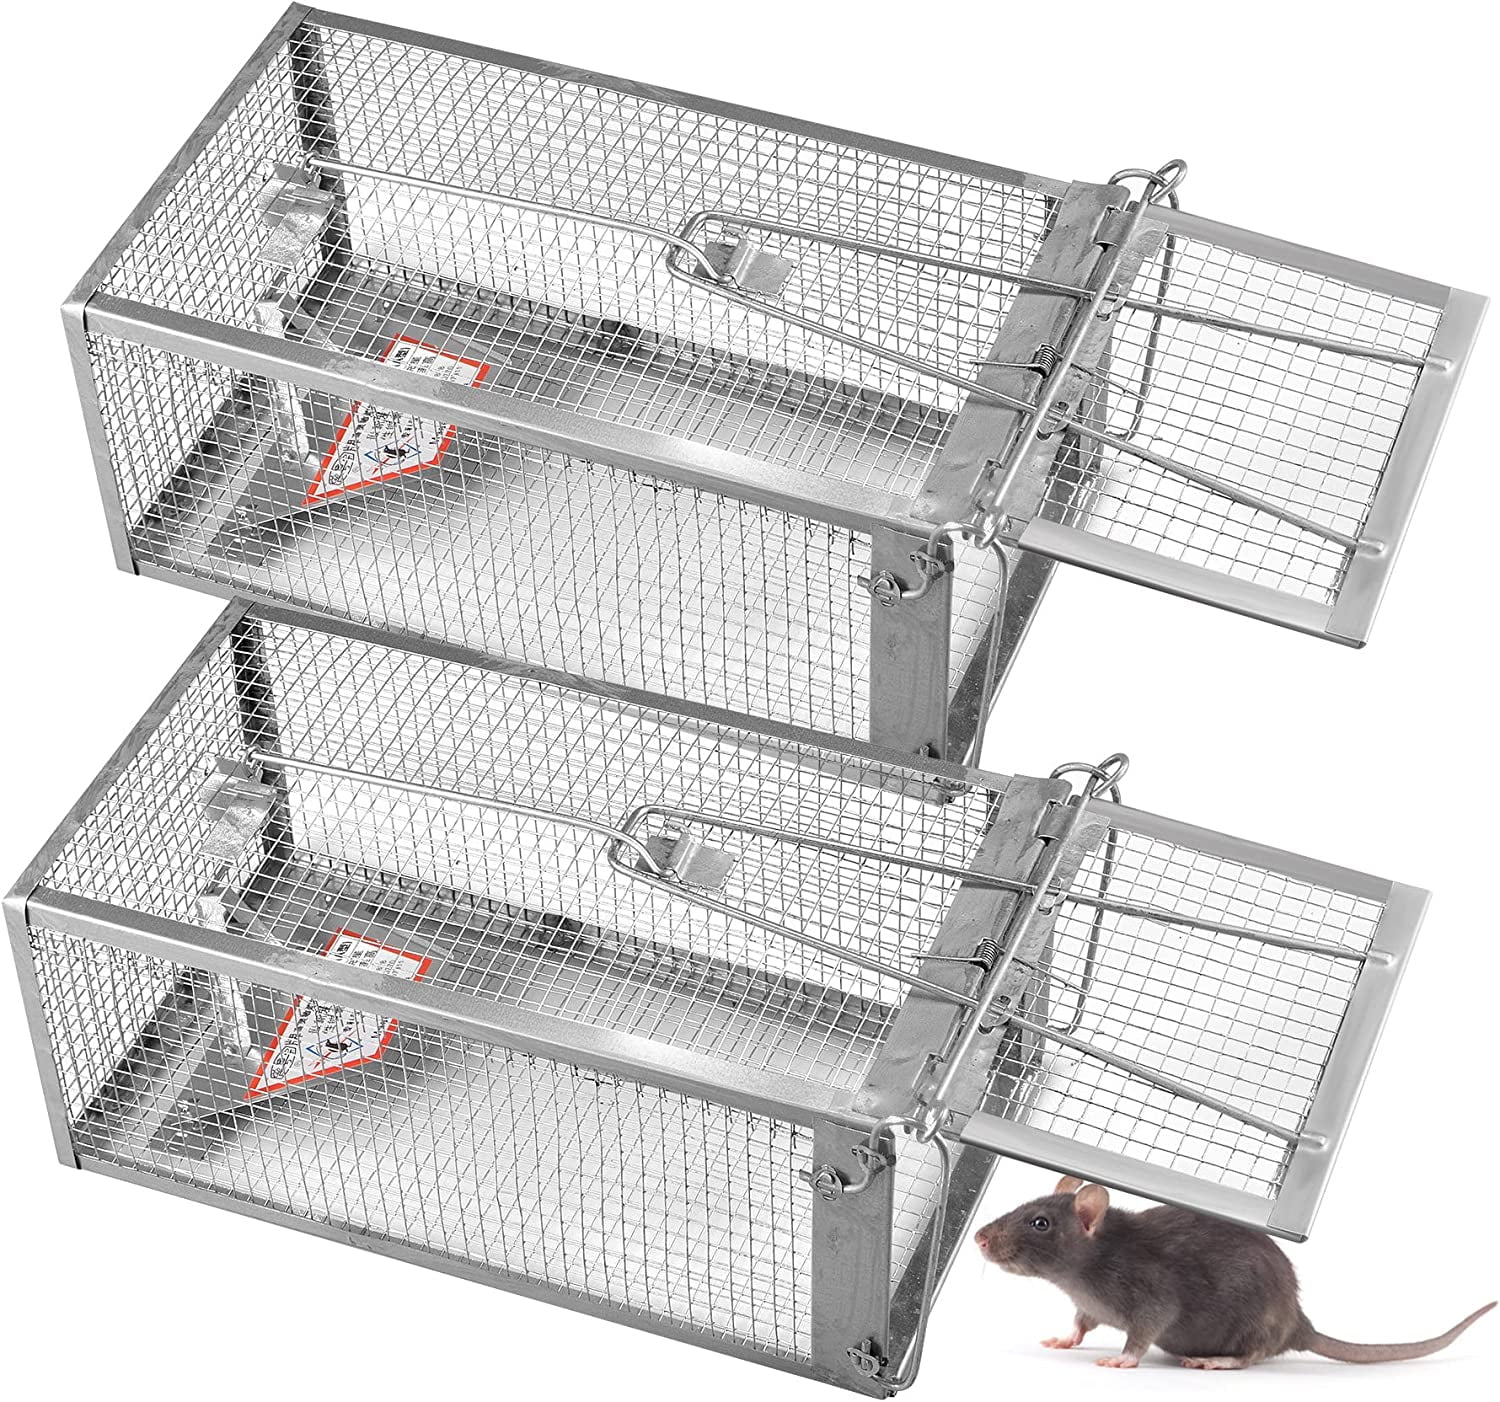 2 pcs Garden Mousetrap Live for indoors & outdoors Animal-friendly